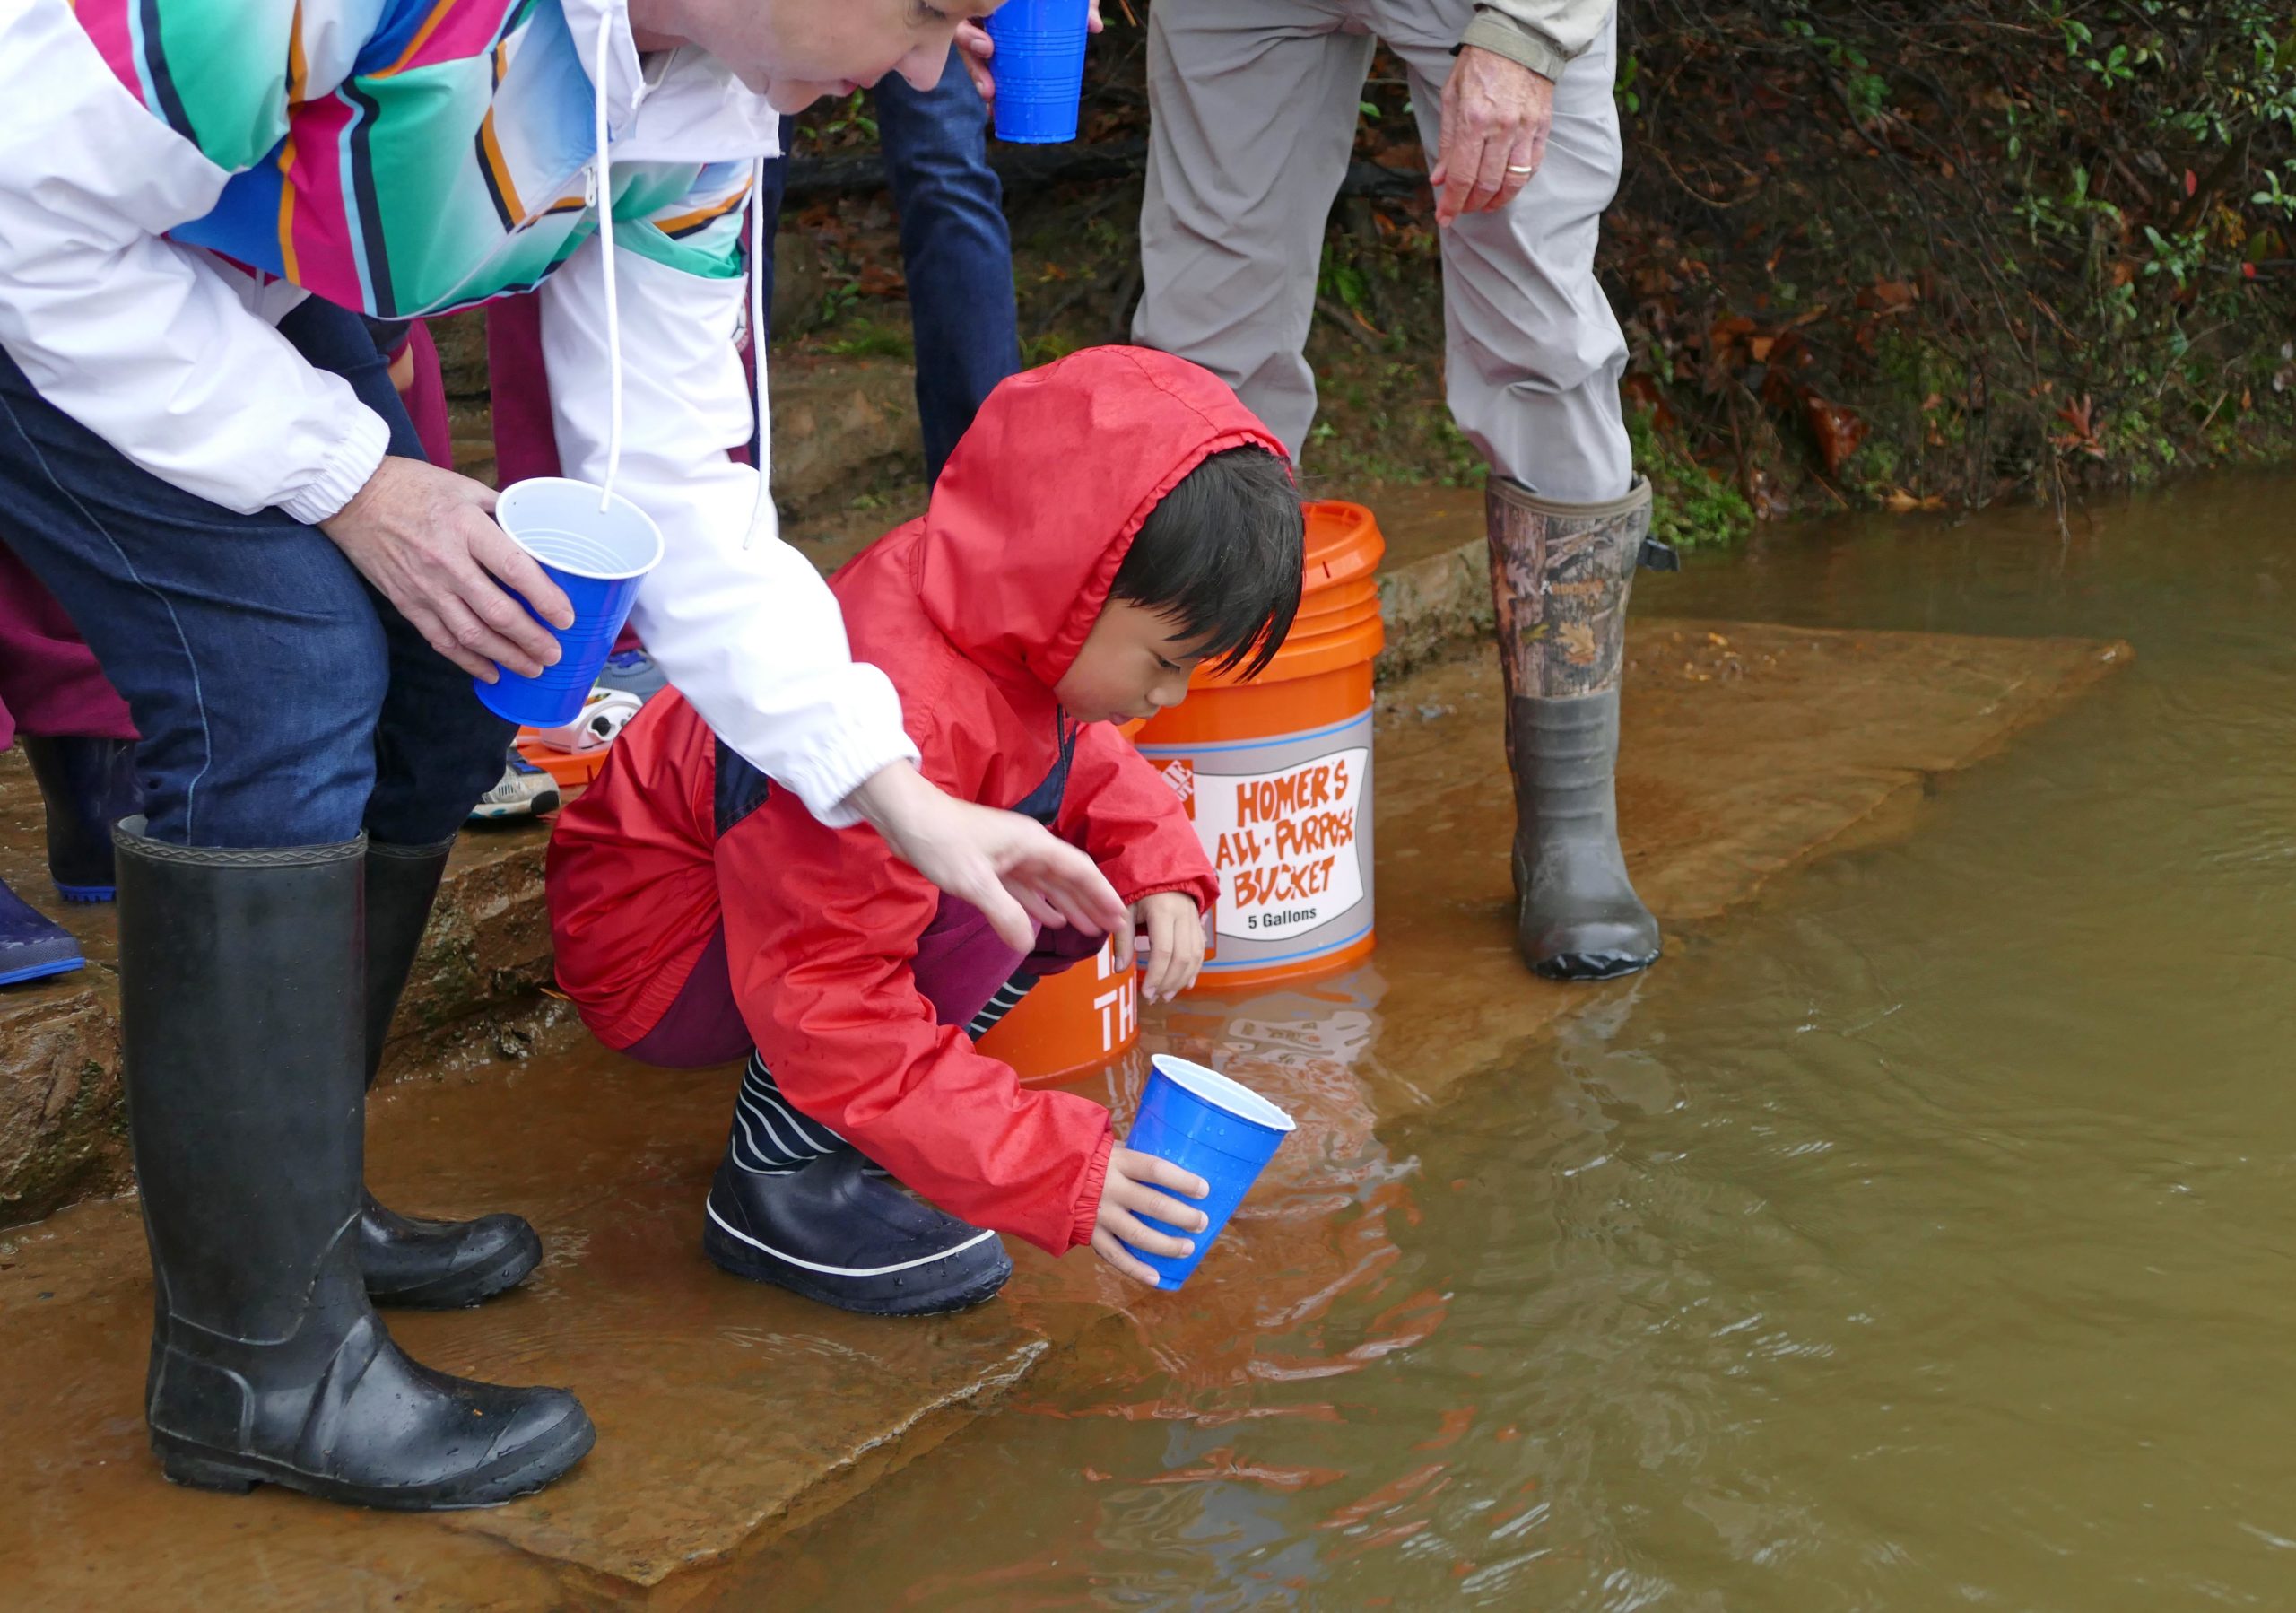 Trout Release